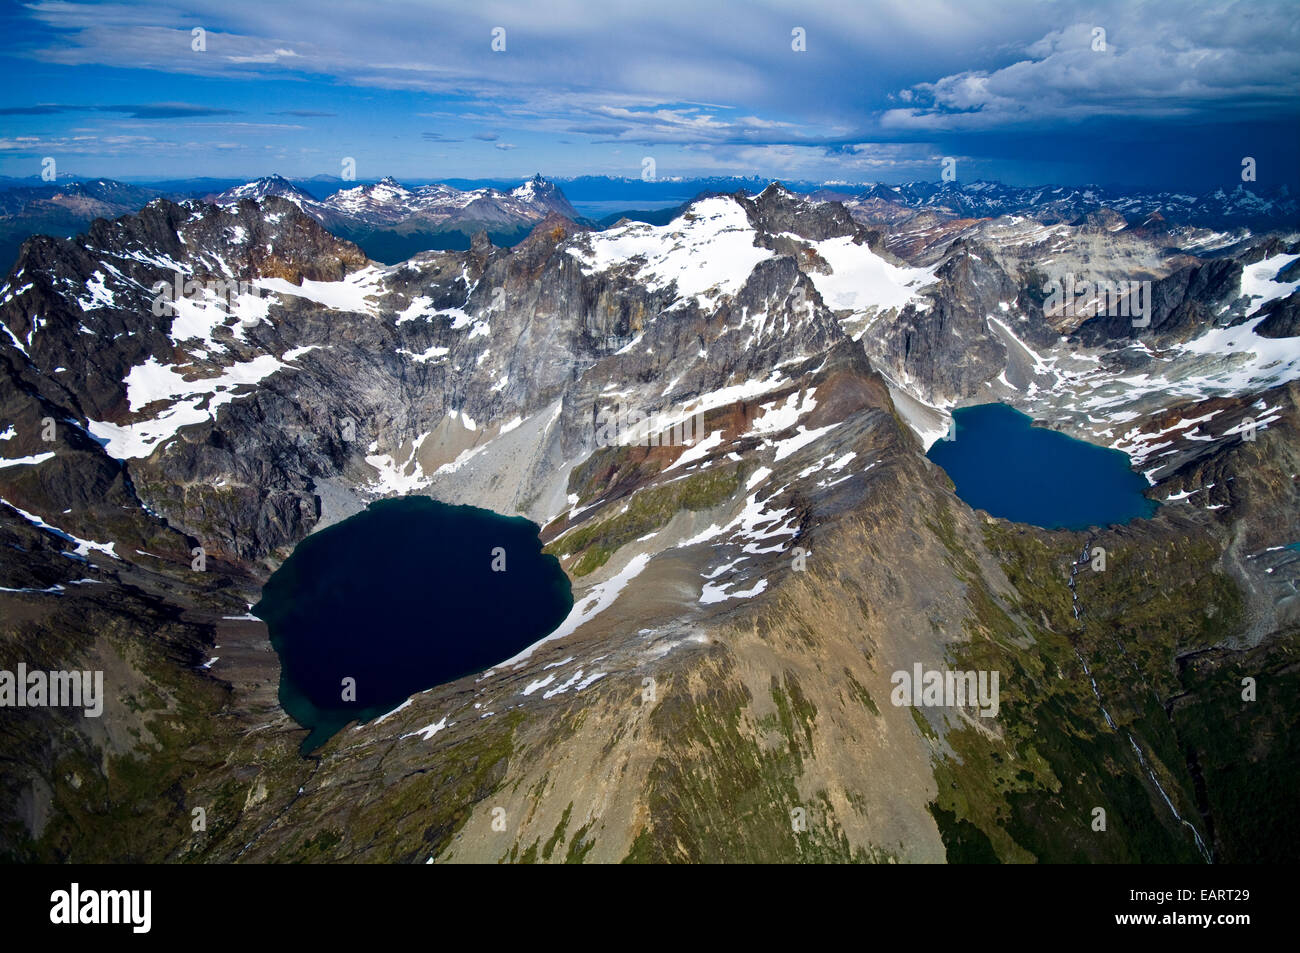 Snow and ice draped peaks cradle two remote turquoise glacial lakes. Stock Photo